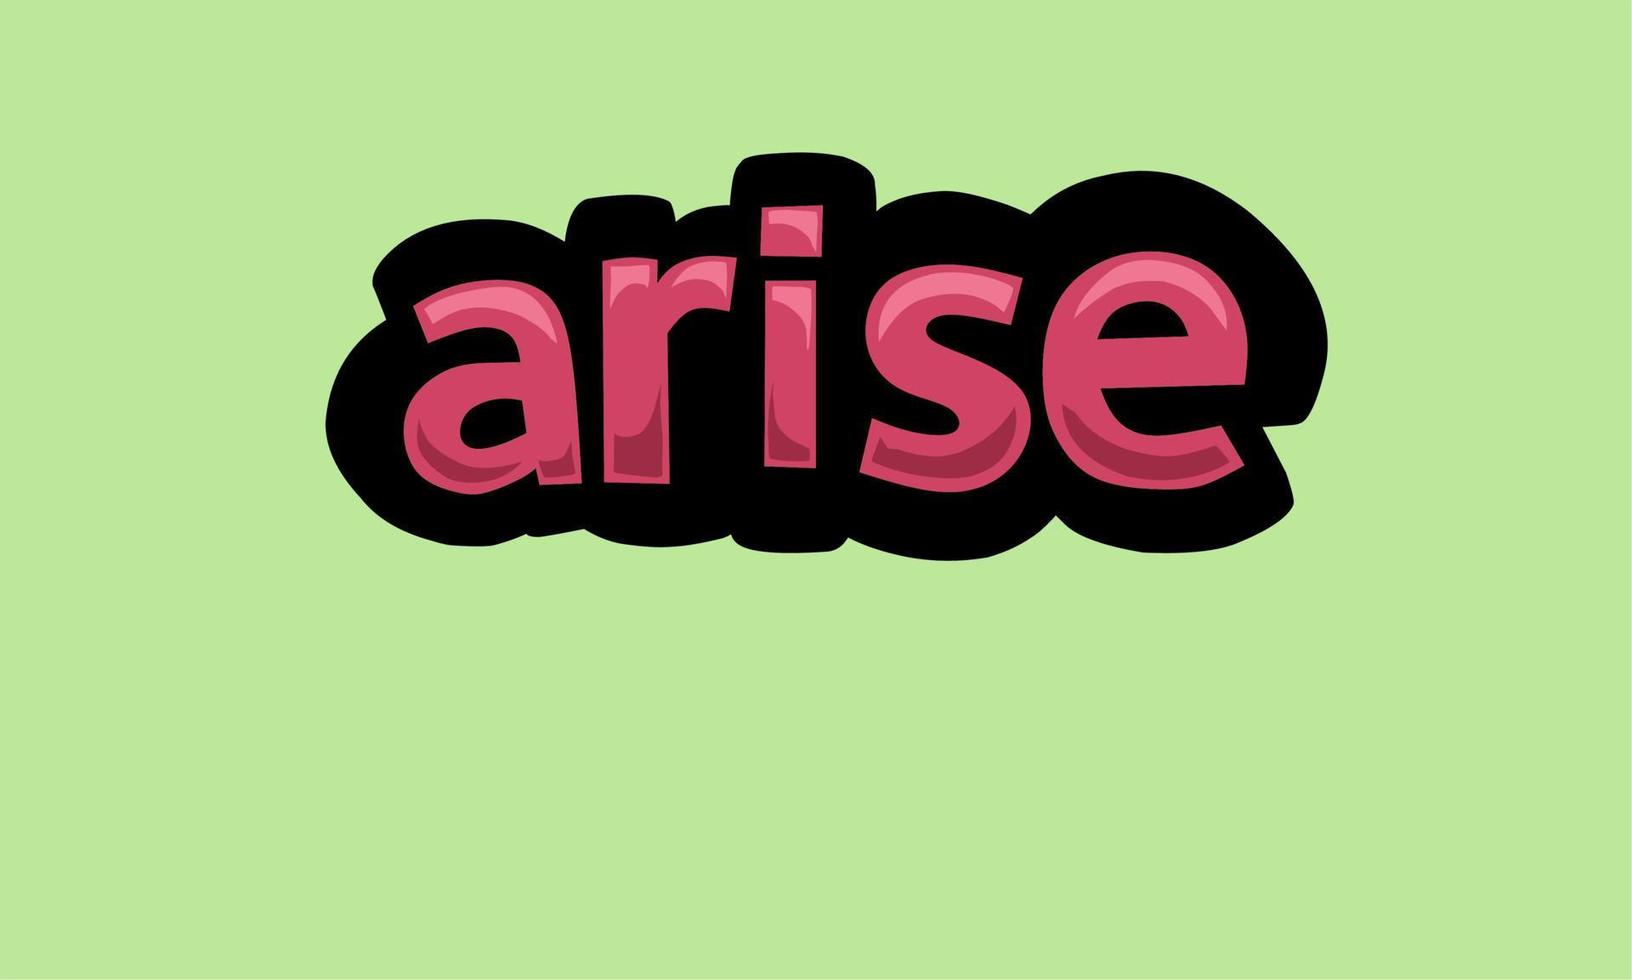 ARISE writing vector design on a green background